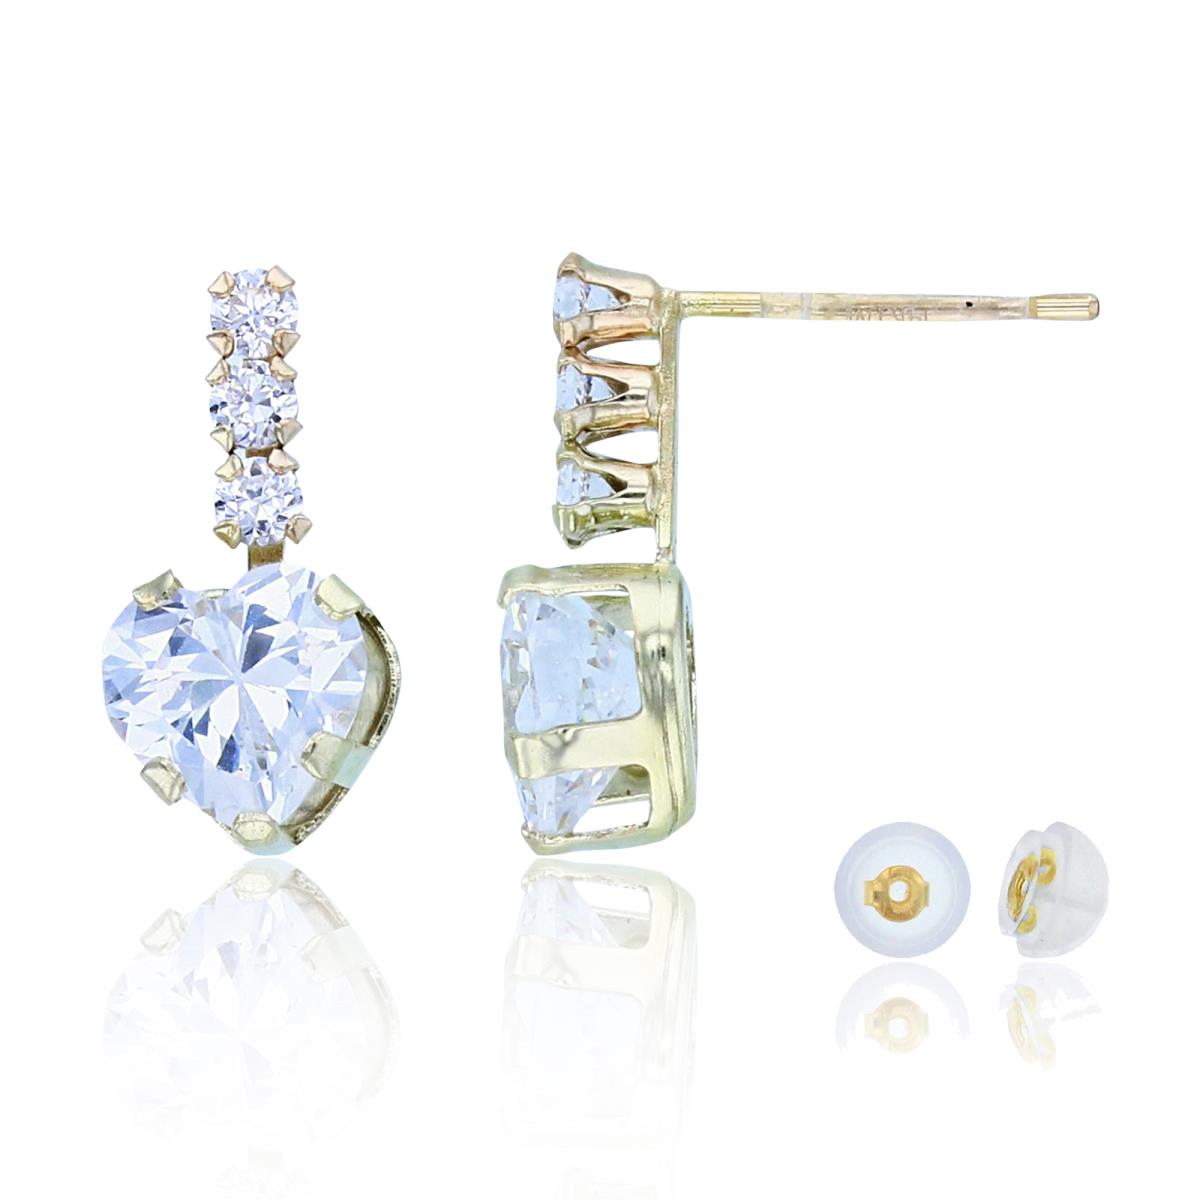 10K Yellow Gold 6mm HS & 2mm Rnd CZ Stud Earrings with Silicon Backs